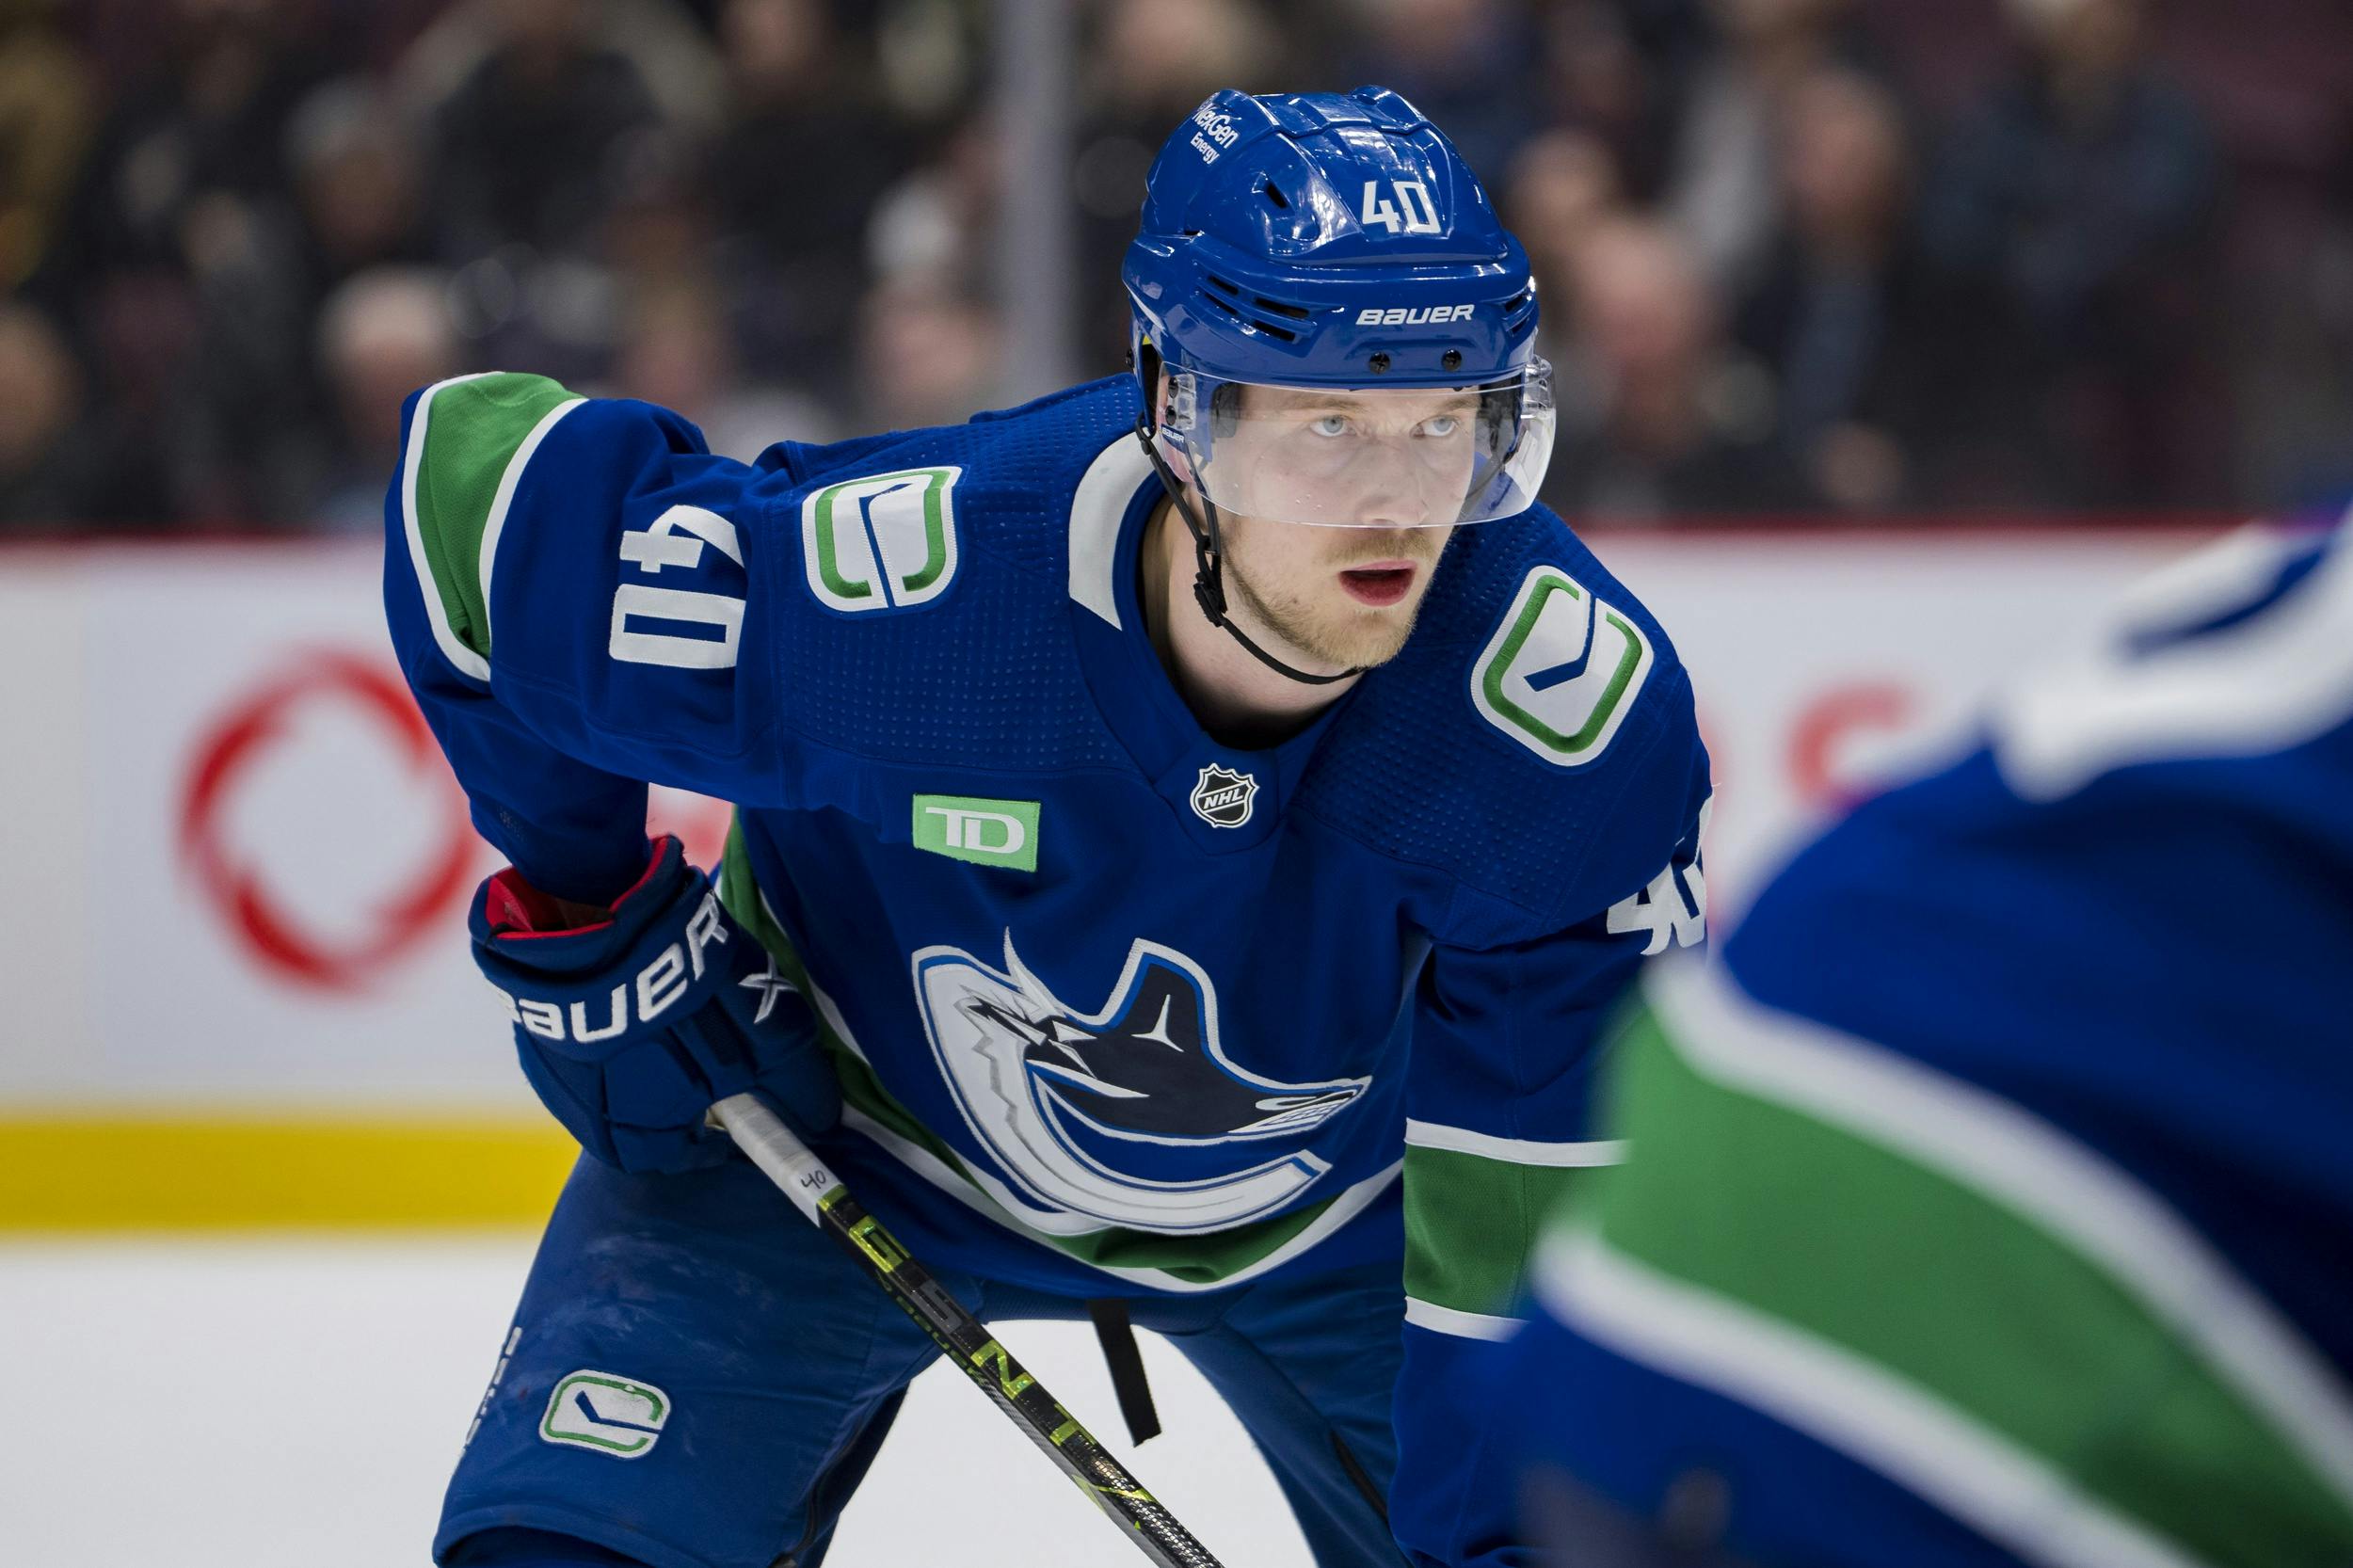 Elias Pettersson selected to represent the Vancouver Canucks at the